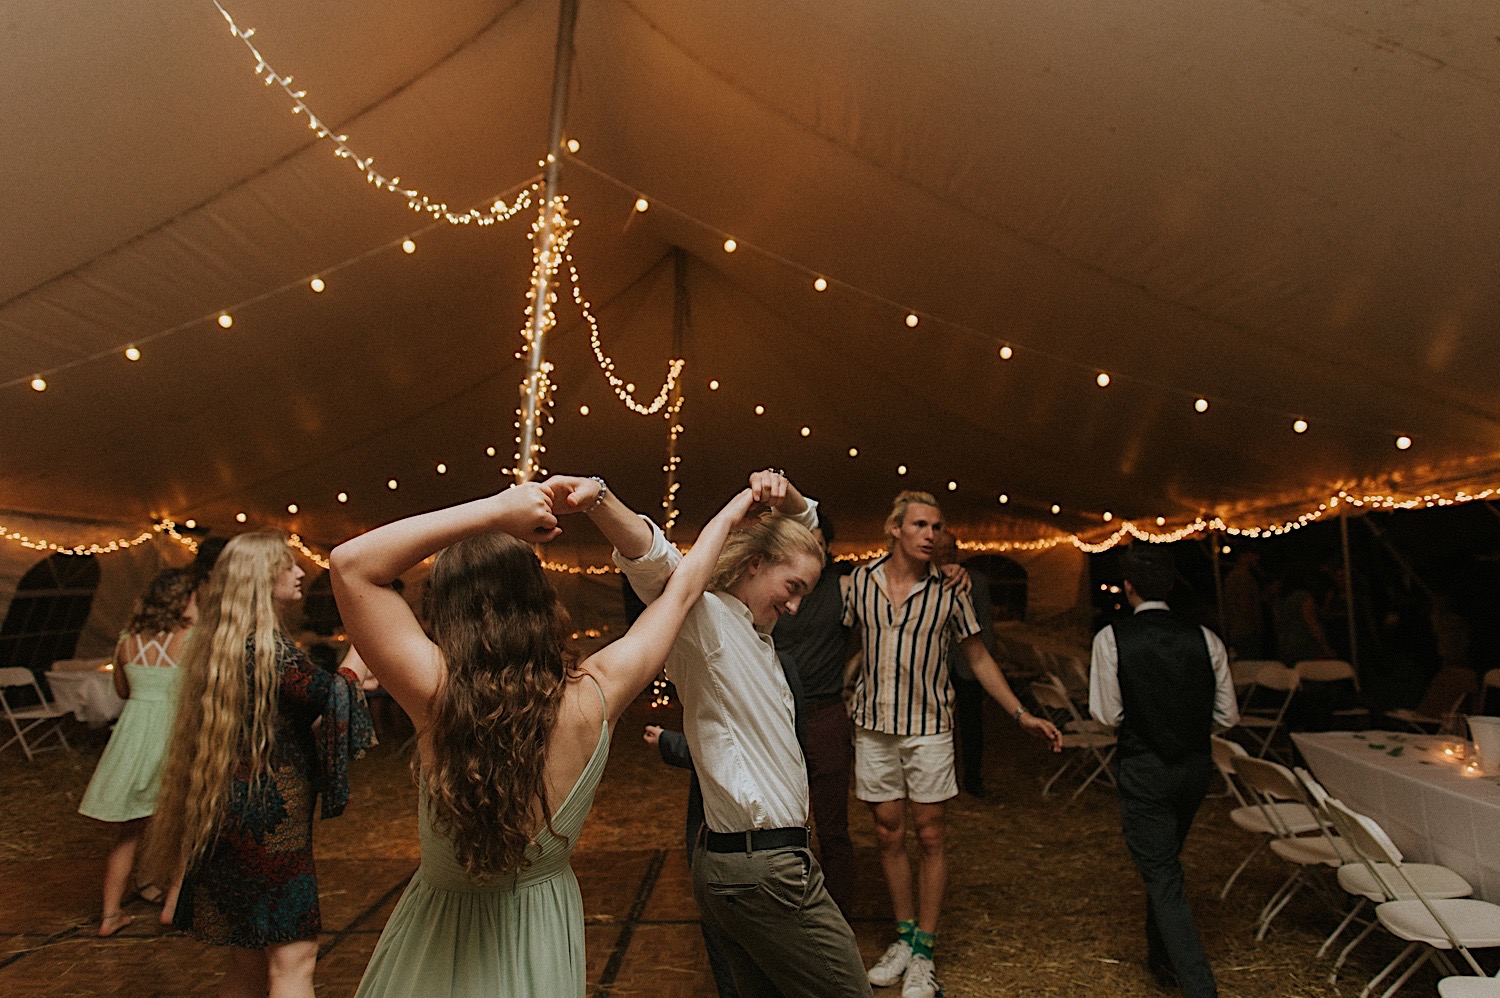 Guests of a backyard wedding in Springfield Illinois dance together under a tent with string lights